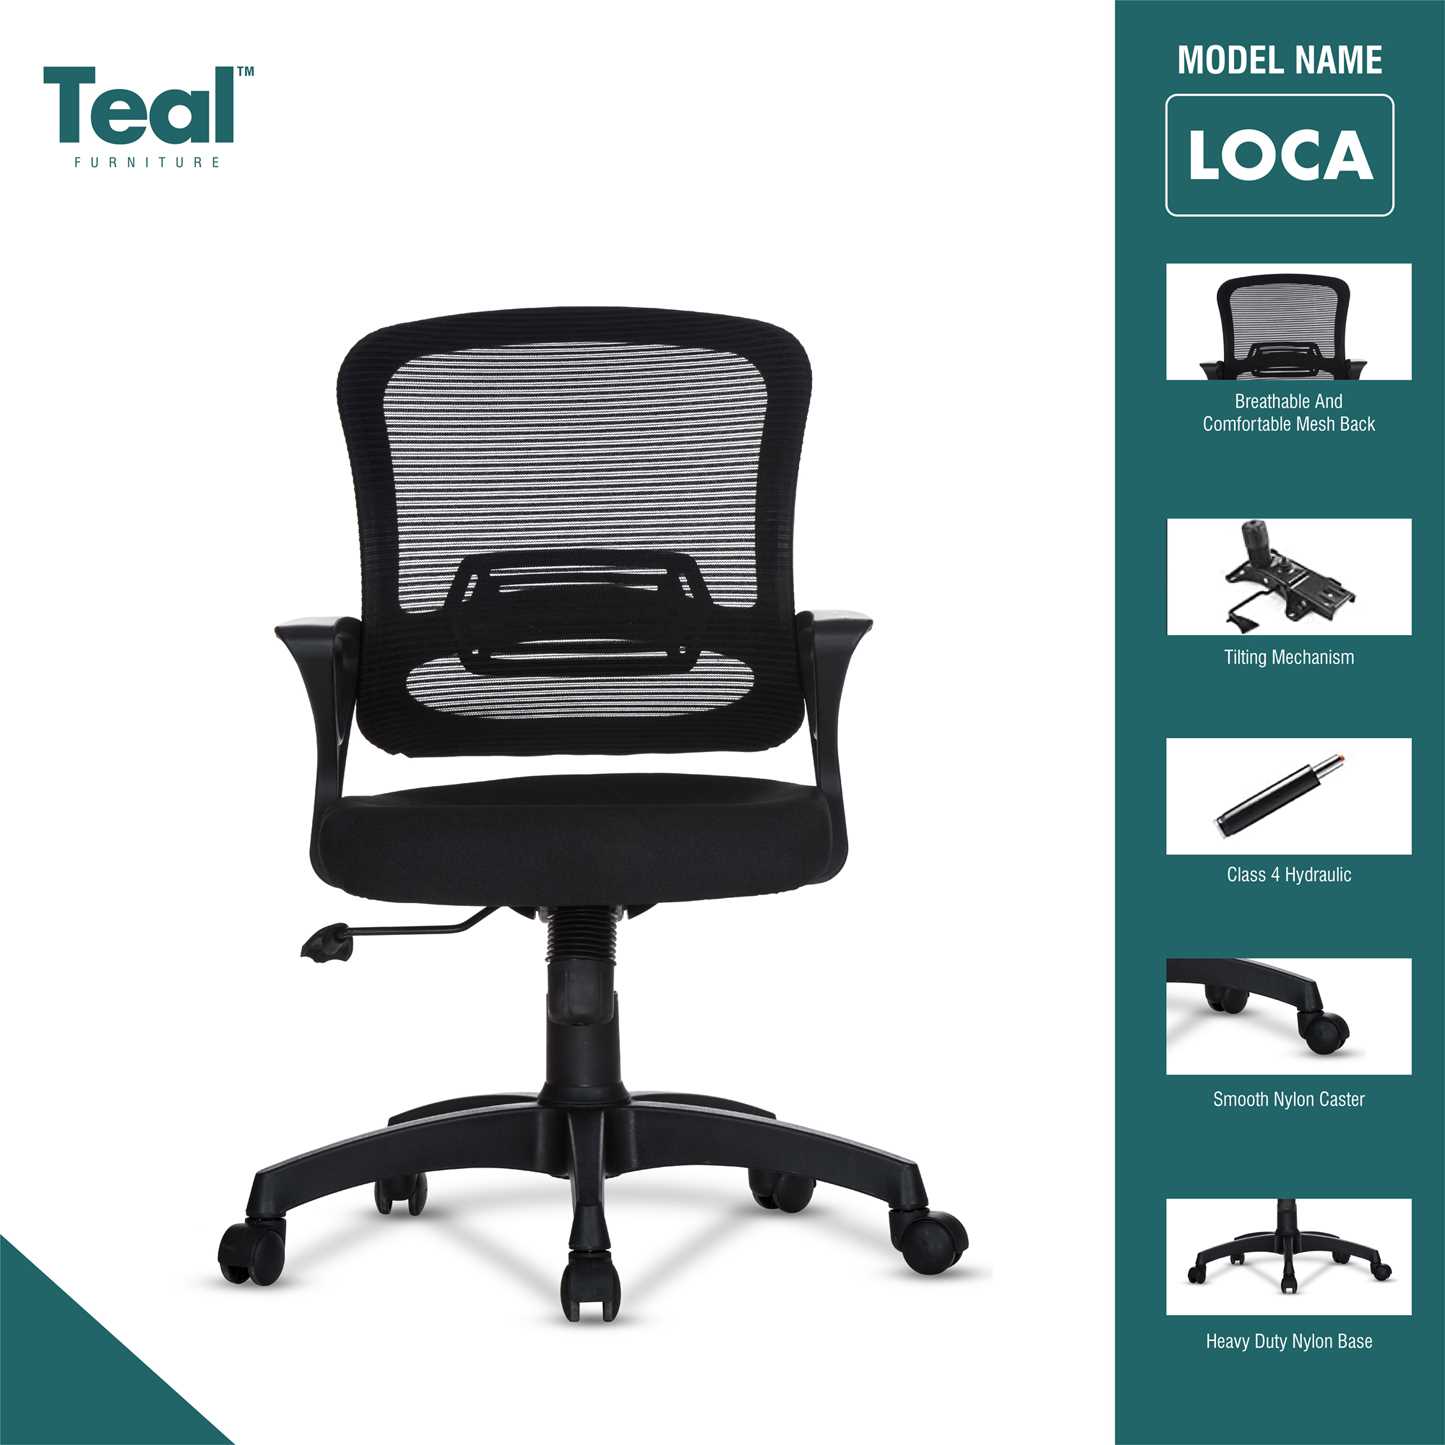 Loca mid back office chair